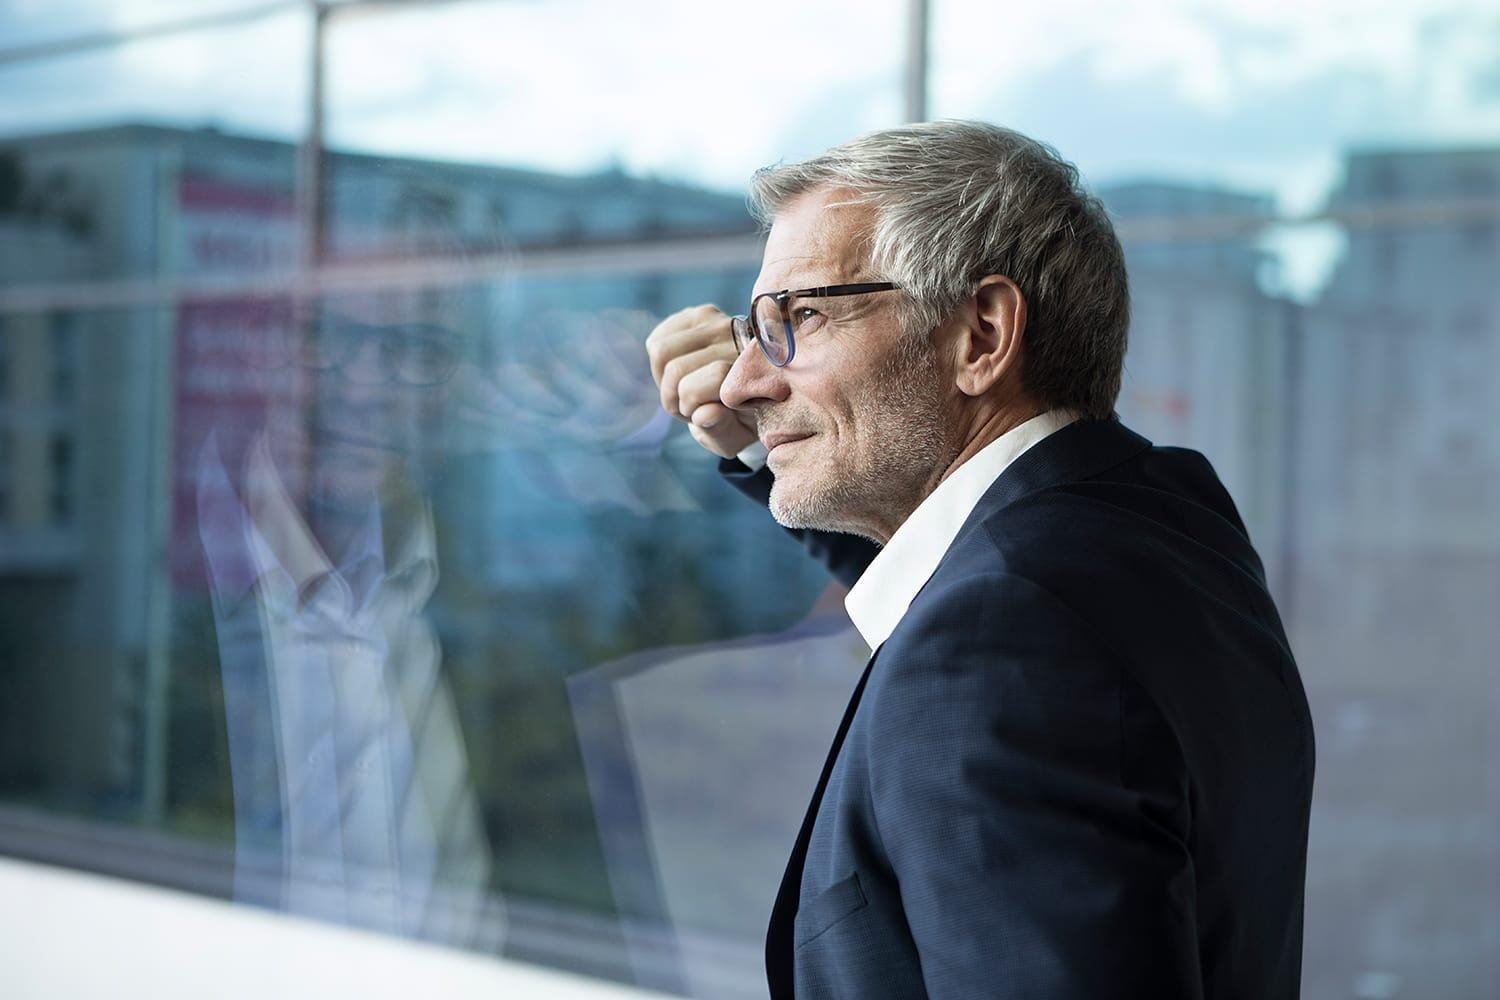 Confident businessman looking out of window